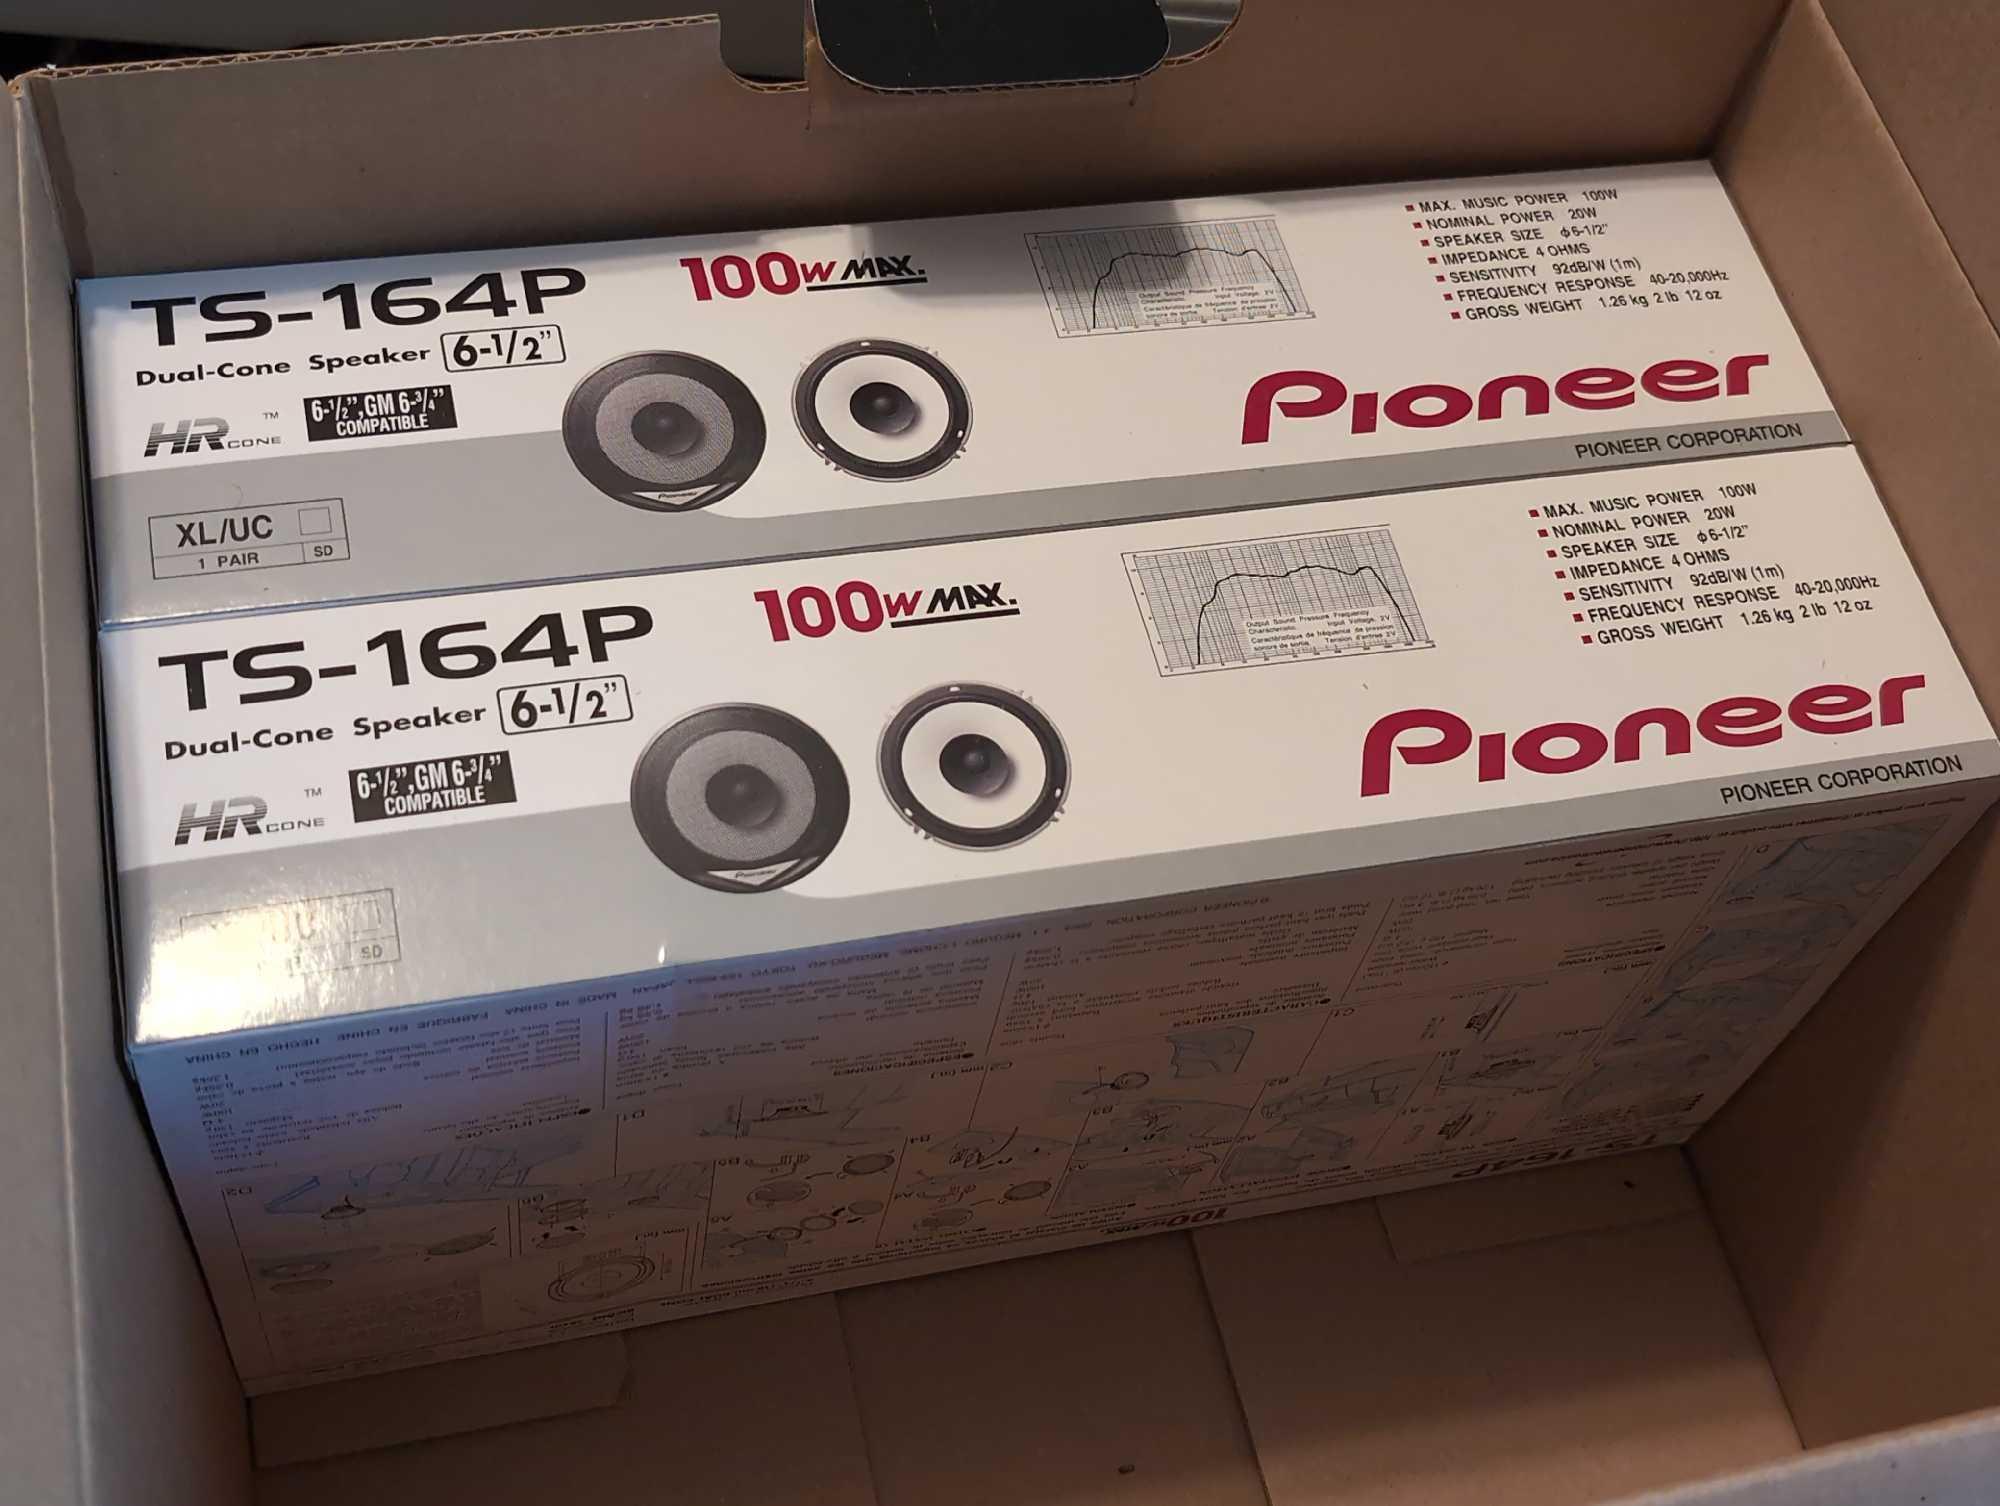 (BR2) PIONEER HIGH PERFORMANCE FOUR SPEAKER COMPACT DISC CAR AUDIO SYSTEM. MODEL #DEHSPO43. APPEARS